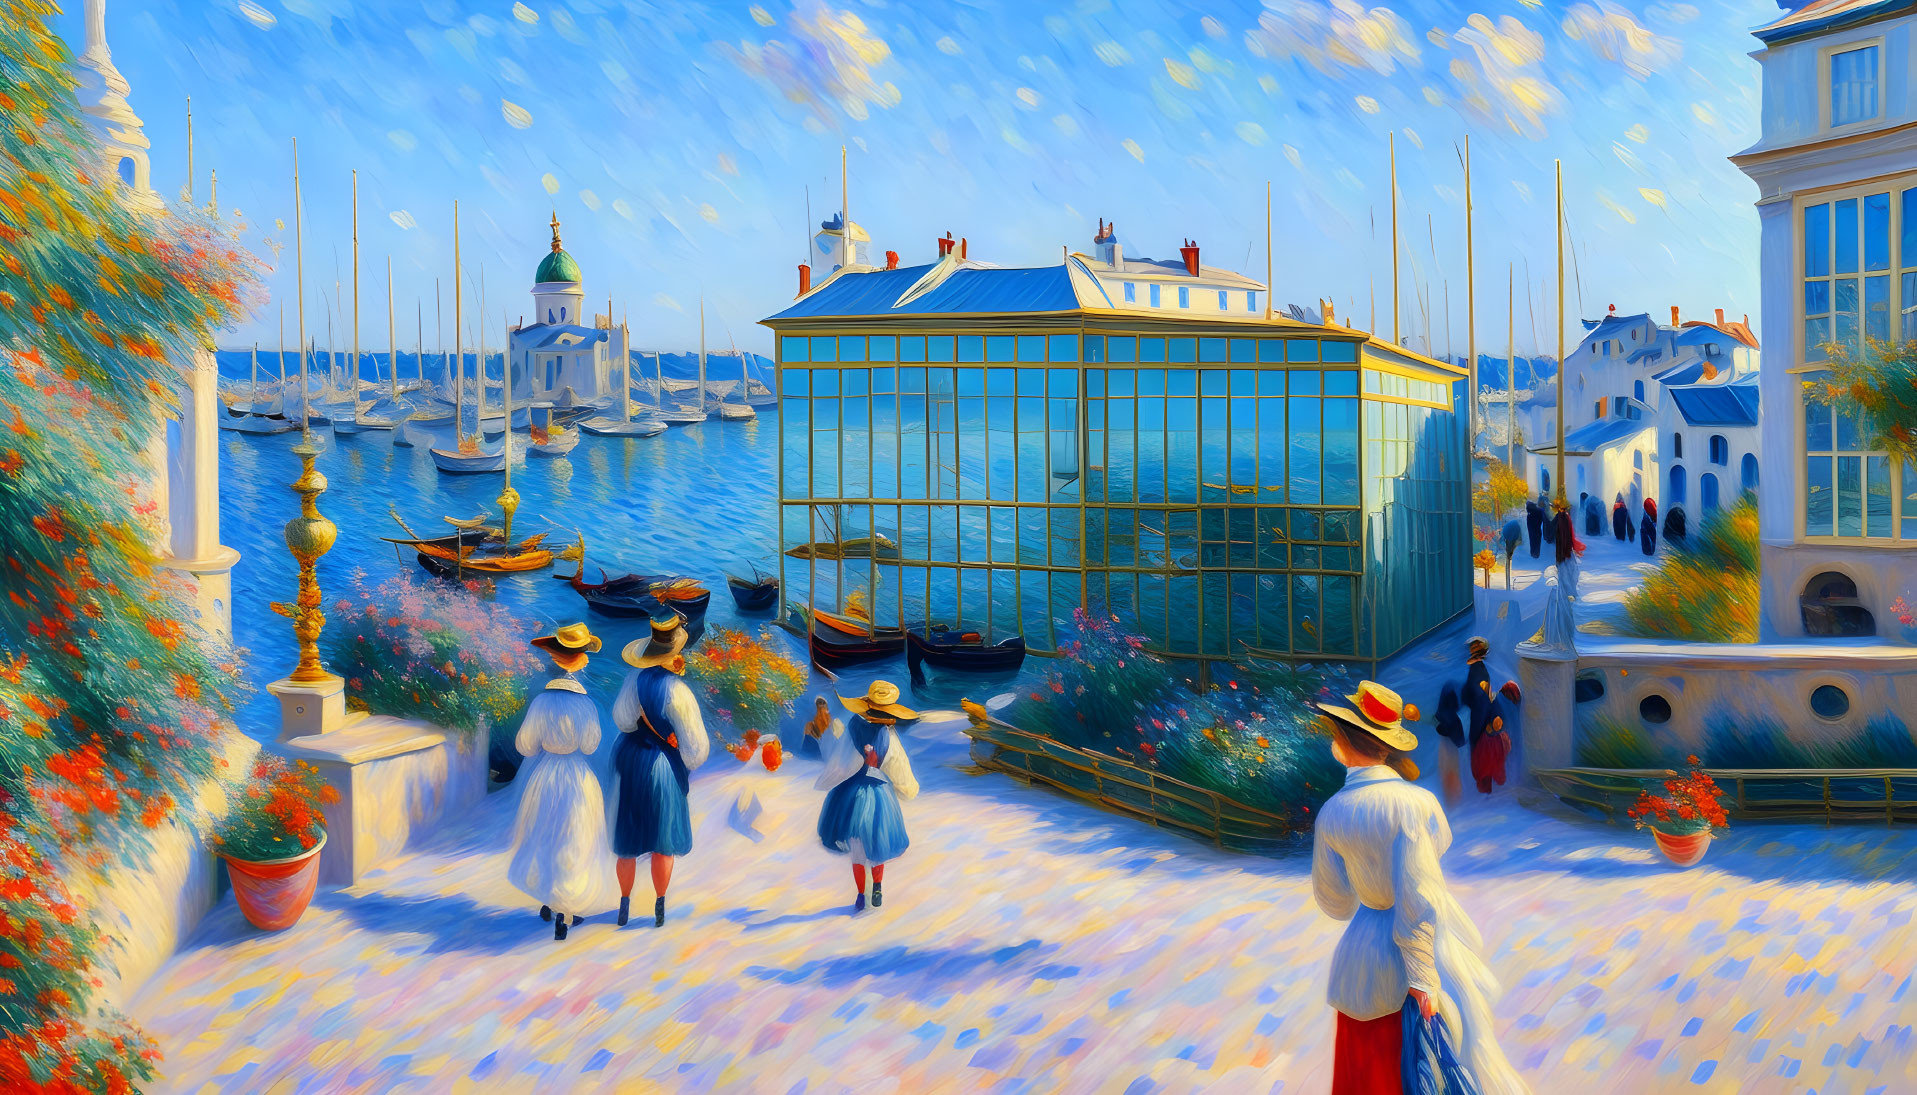 Impressionist-style painting: People by the sea with sailboats, lighthouse, glass pavilion